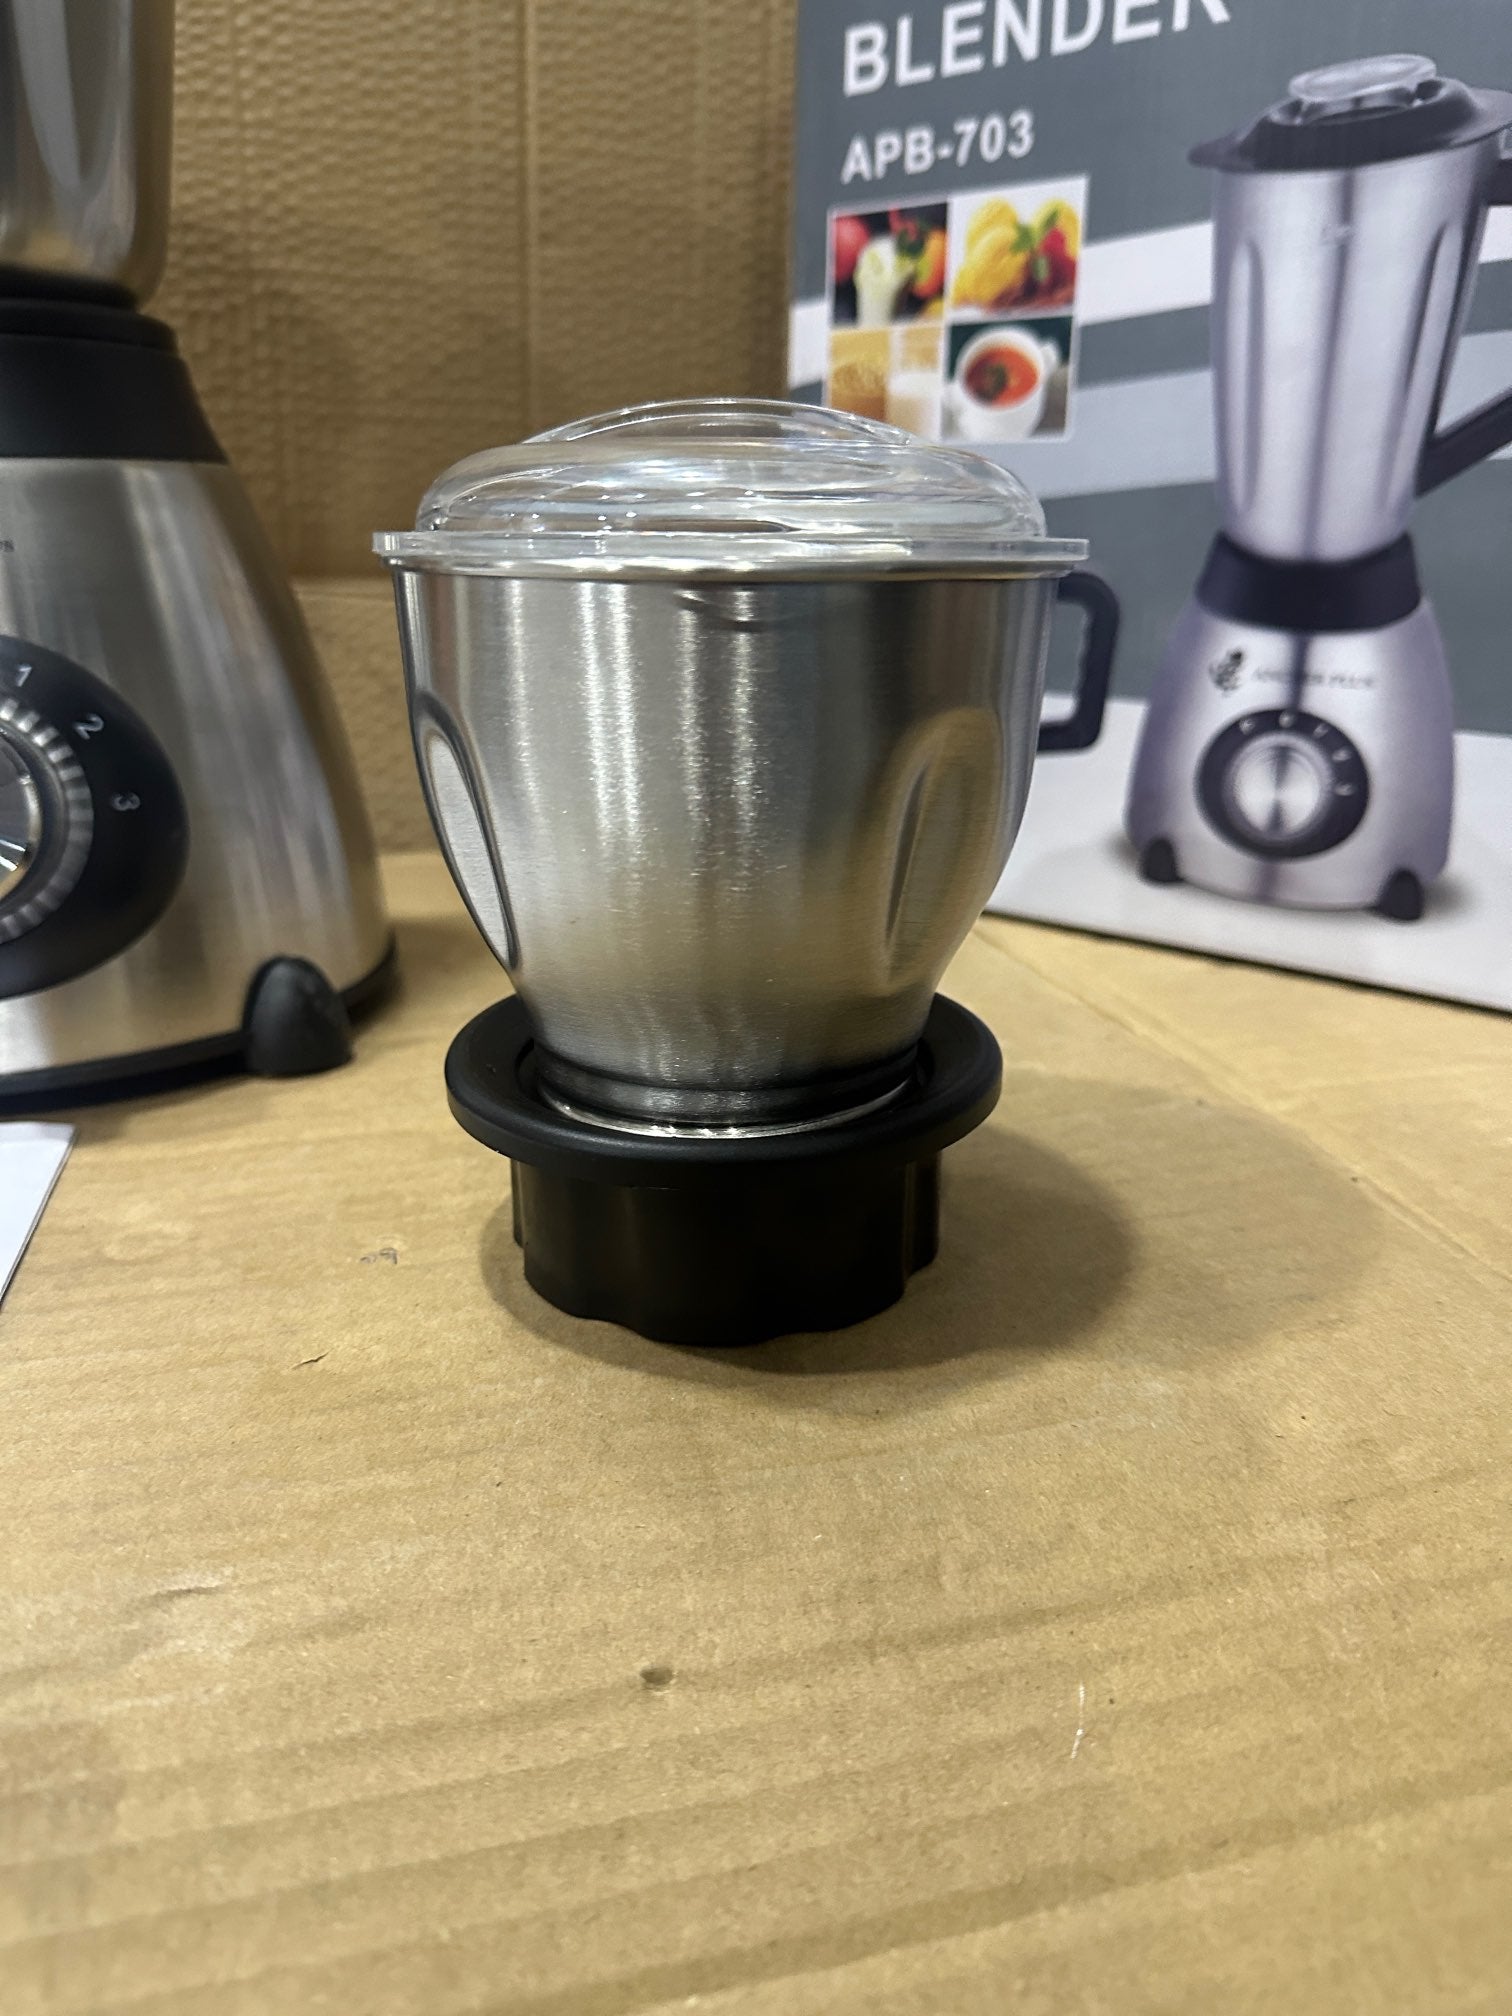 Lot imported 3 in 1 Ancher Plus Blender